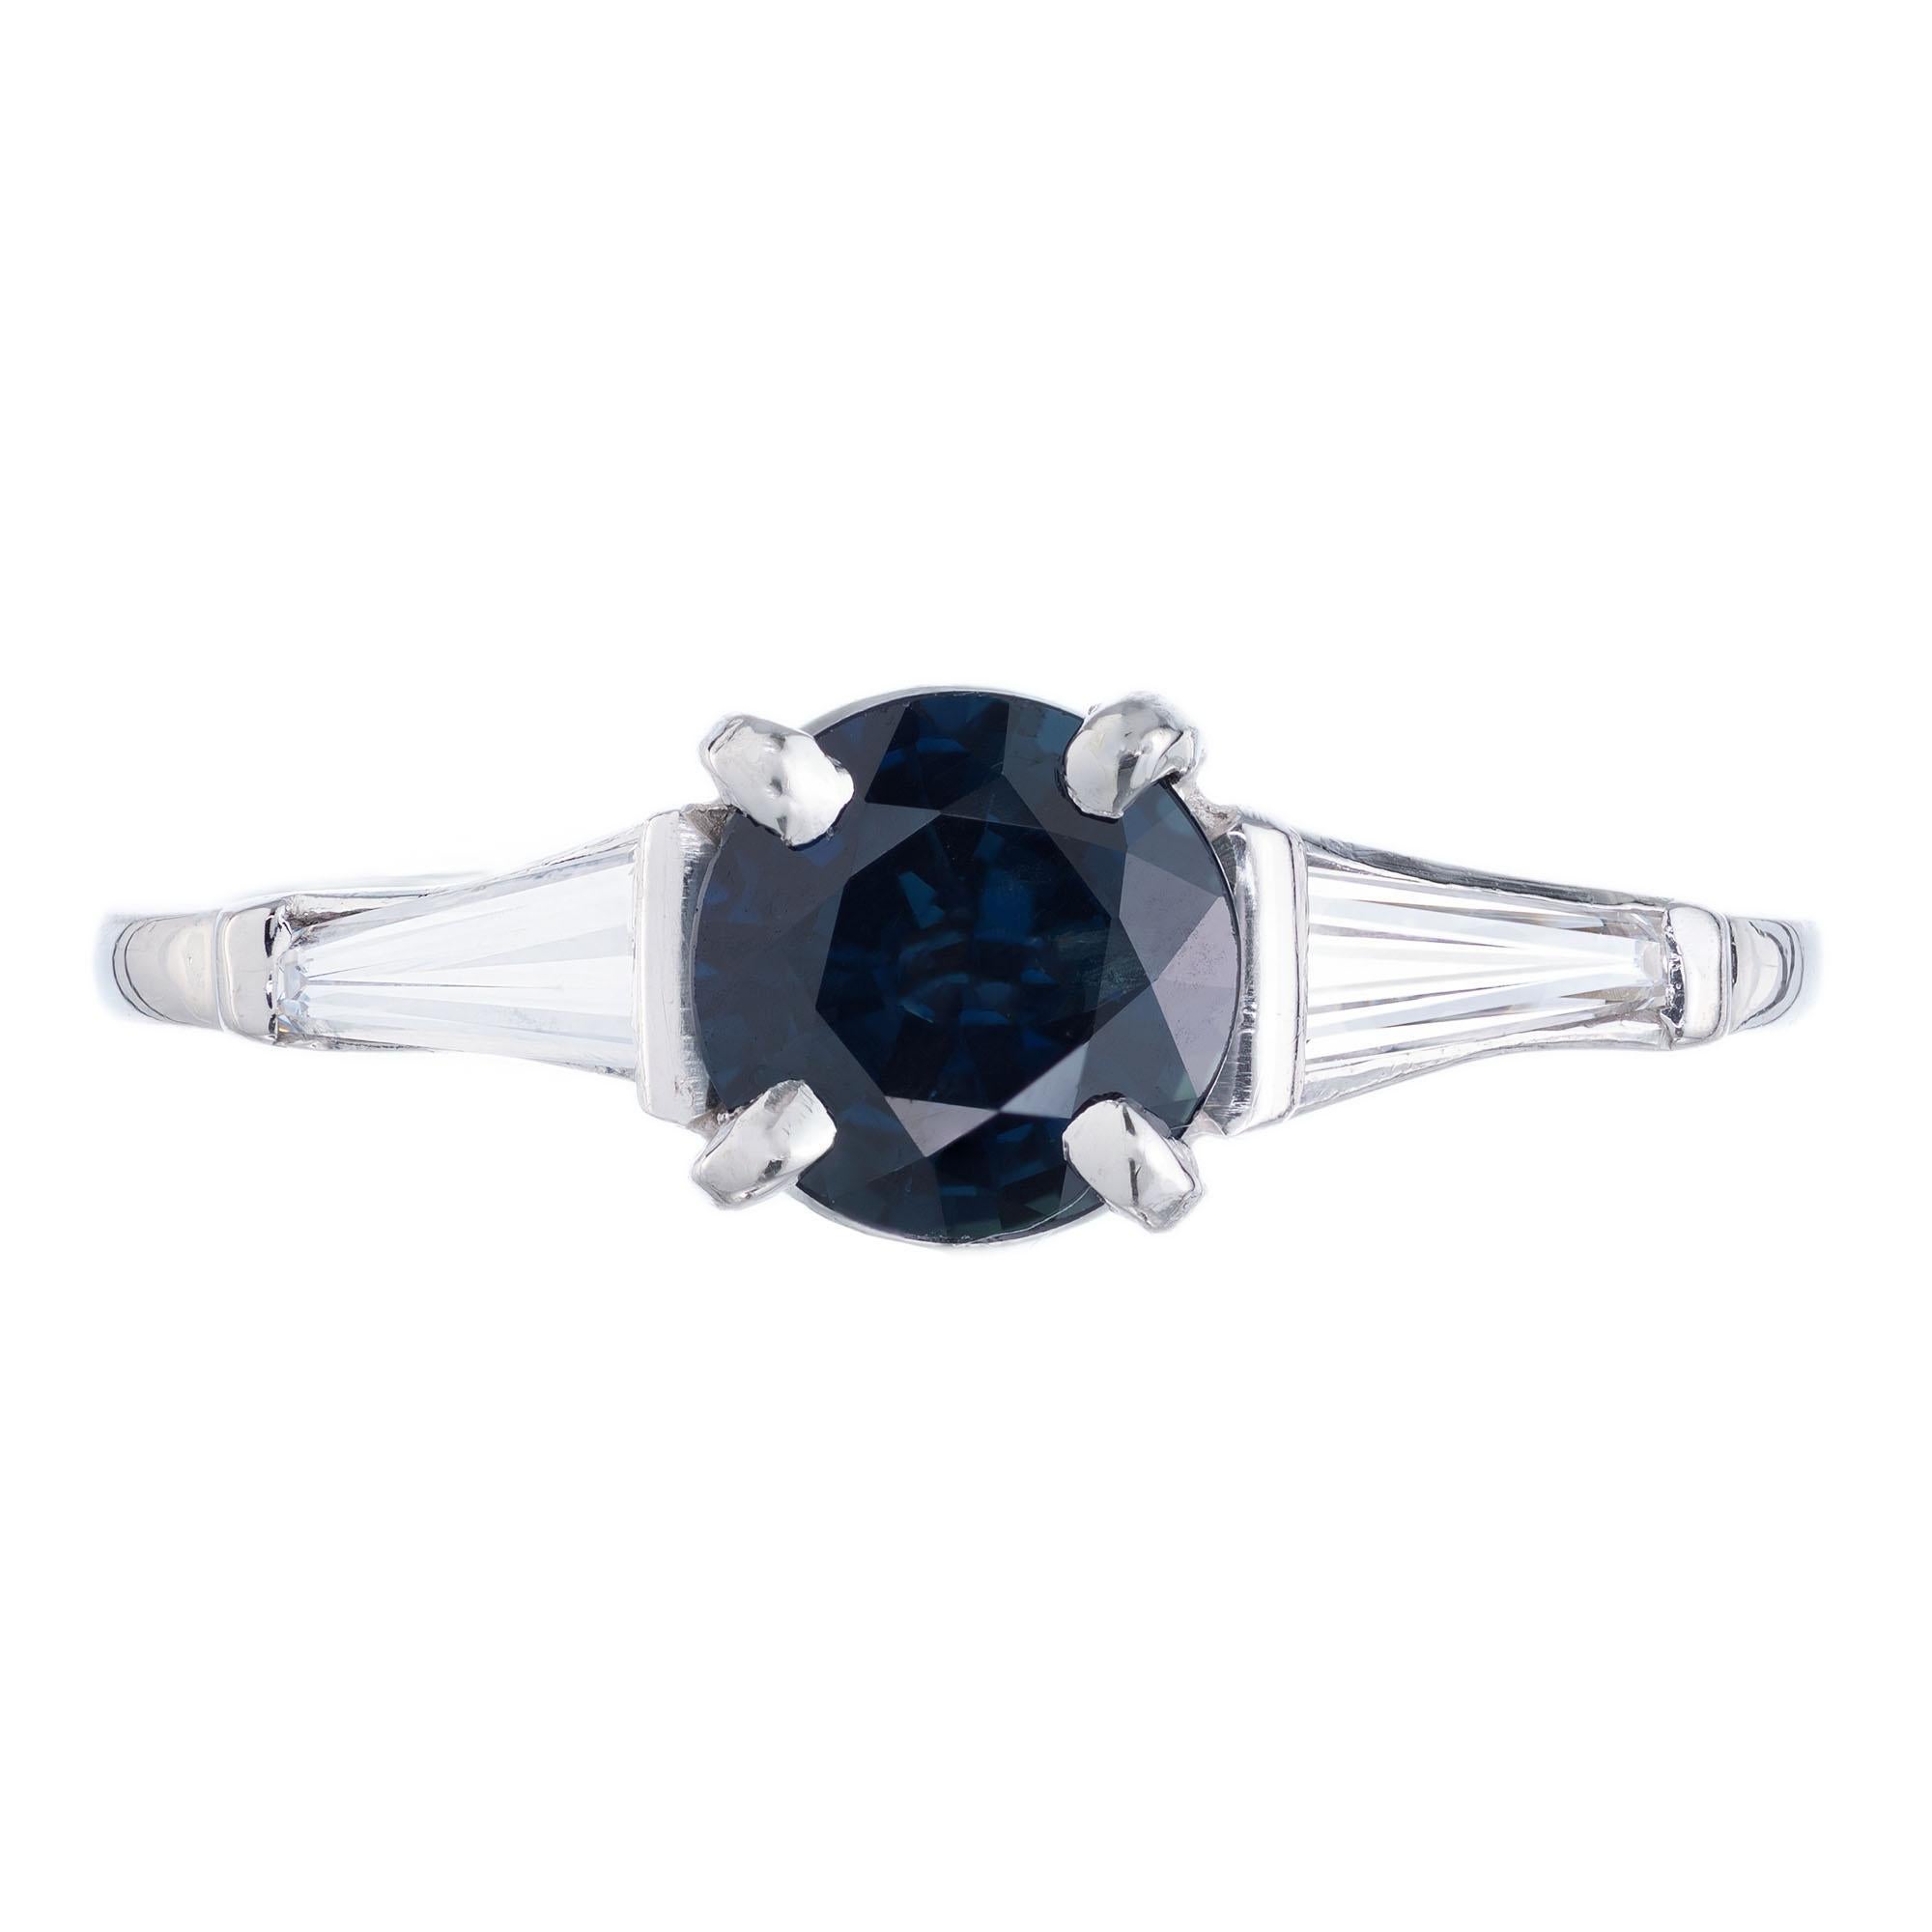 1.00ct round Royal blue Sapphire in a classic three-stone platinum setting with 2 baguette side diamonds. 

1 round deep Royal blue Sapphire, approx. total weight 1.00cts, 5.9mm, simple heat only
2 tapered baguette diamonds, approx. total weight